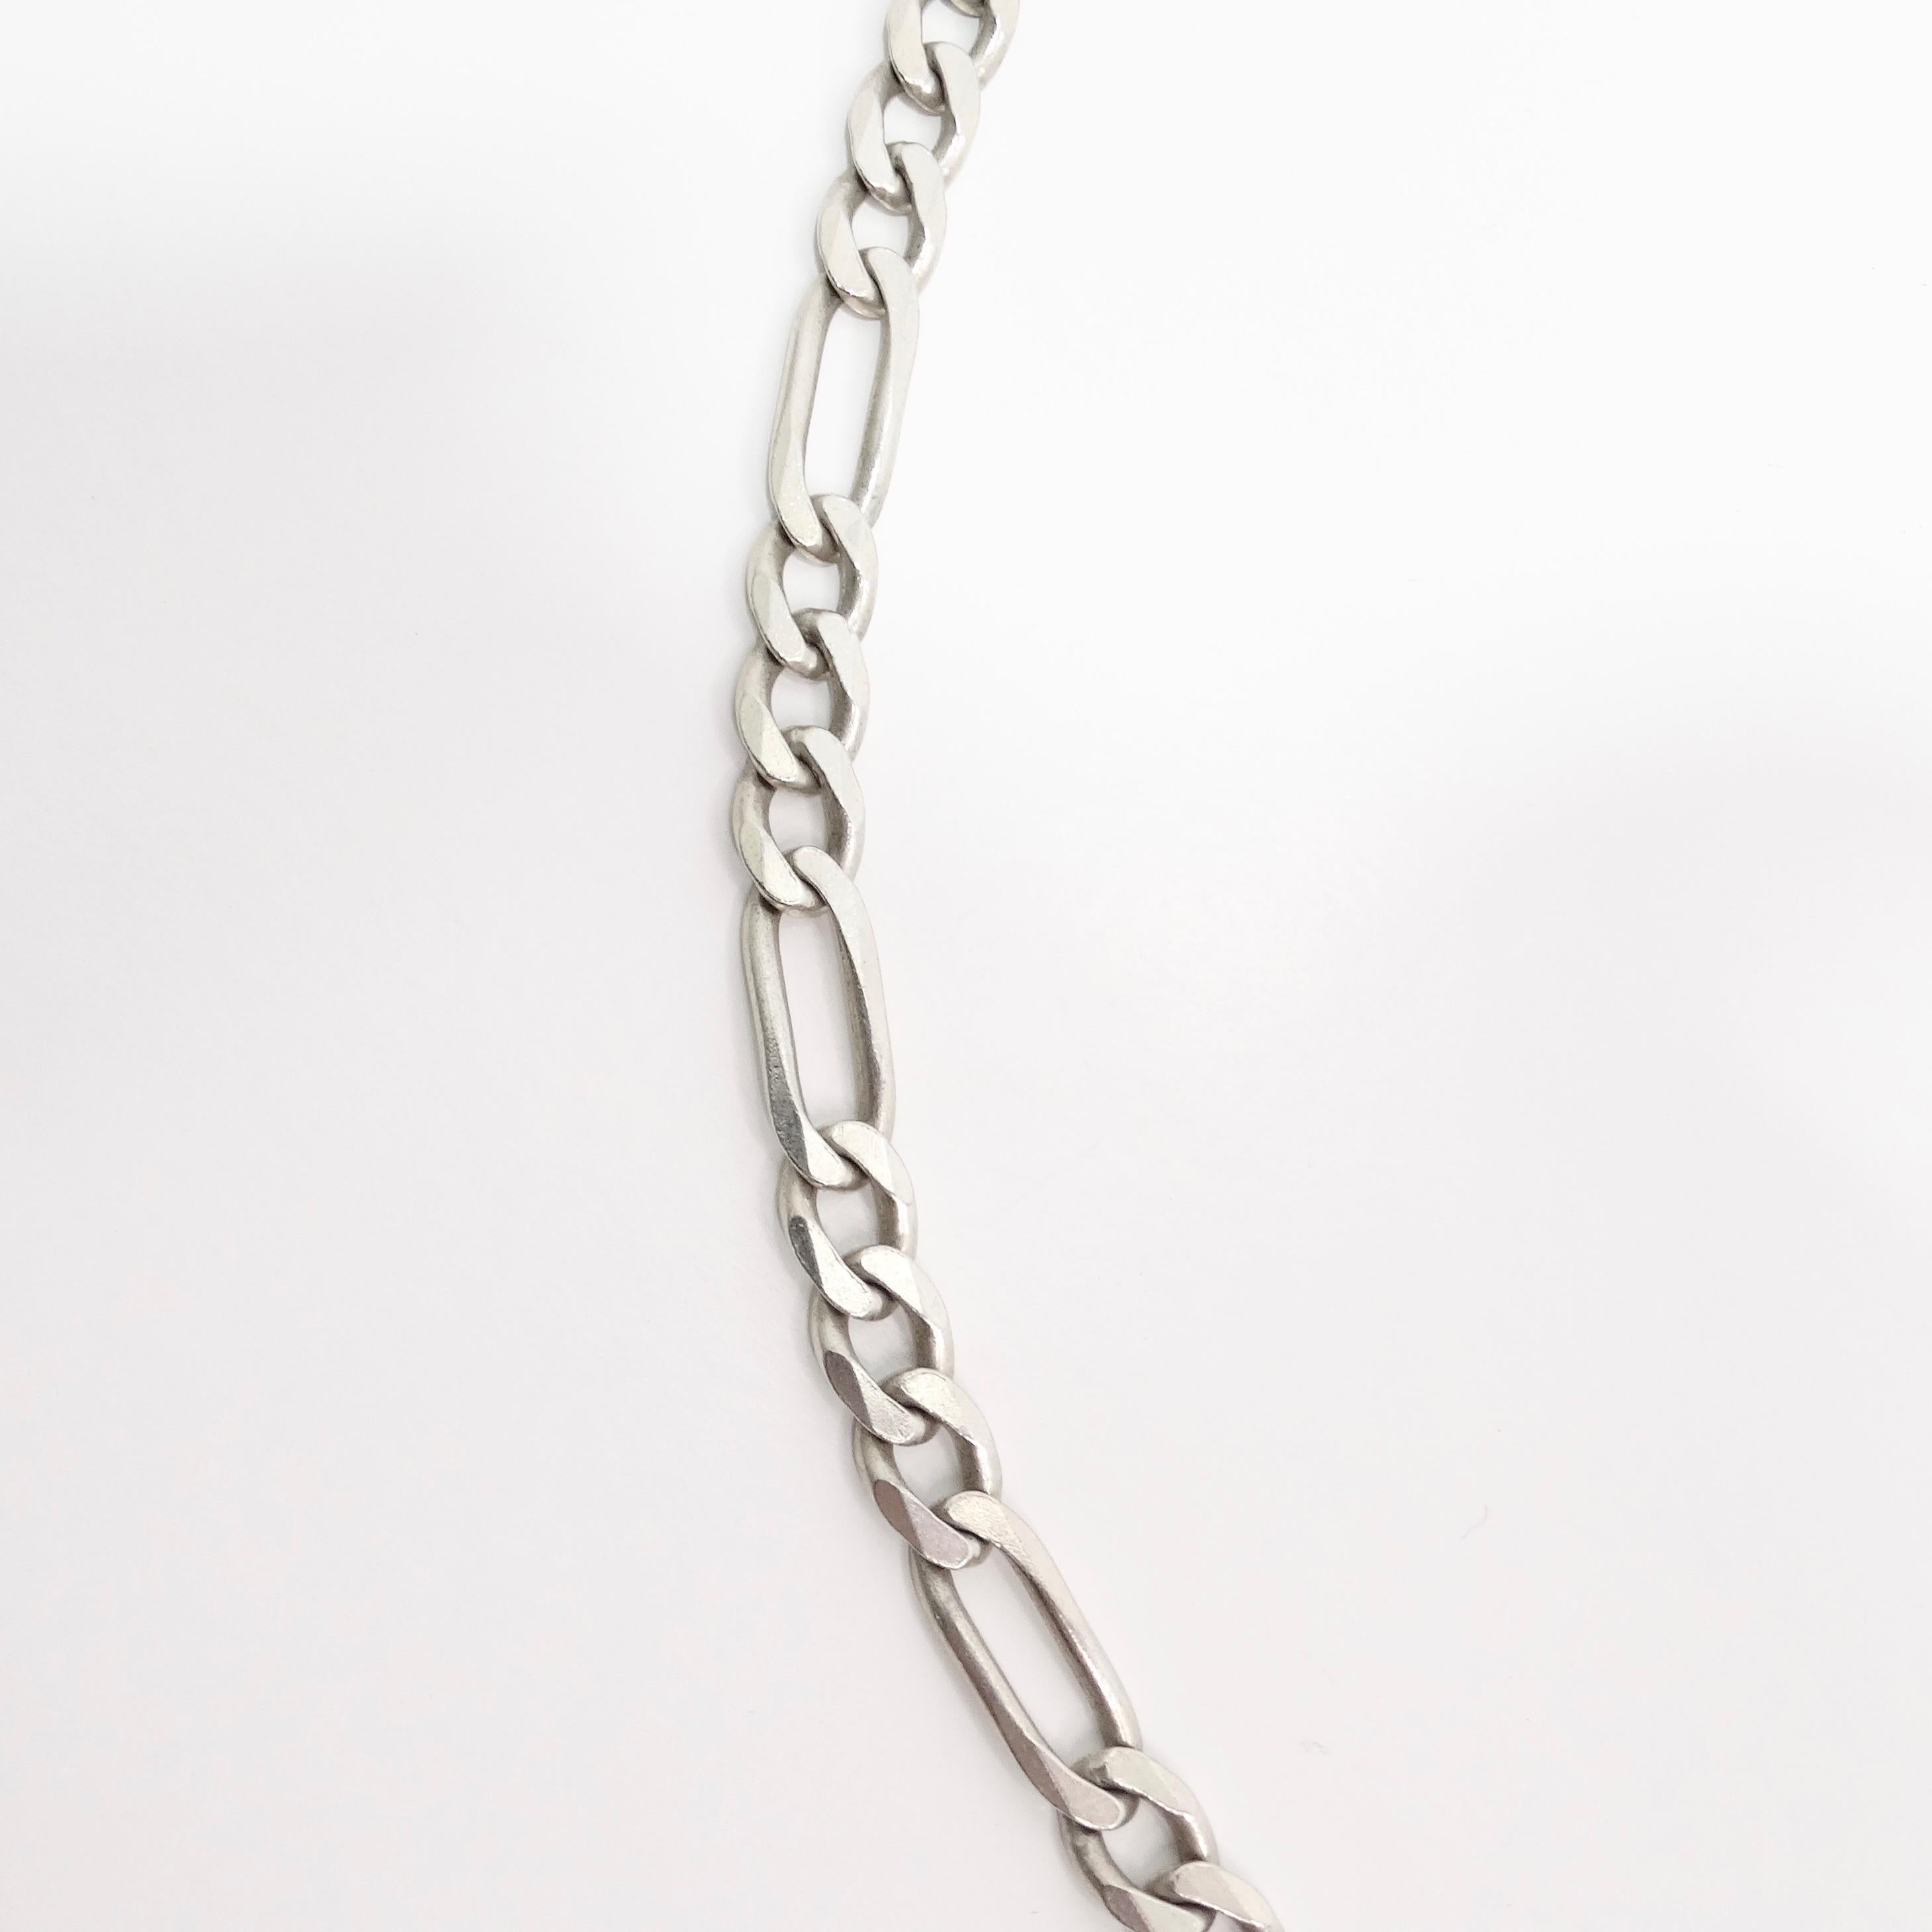 Introducing the 1980s Solid Silver Miami Link Chain Necklace, a timeless and versatile piece that captures the essence of classic style. This vintage necklace features a shiny silver Miami-style link chain, known for its bold yet elegant